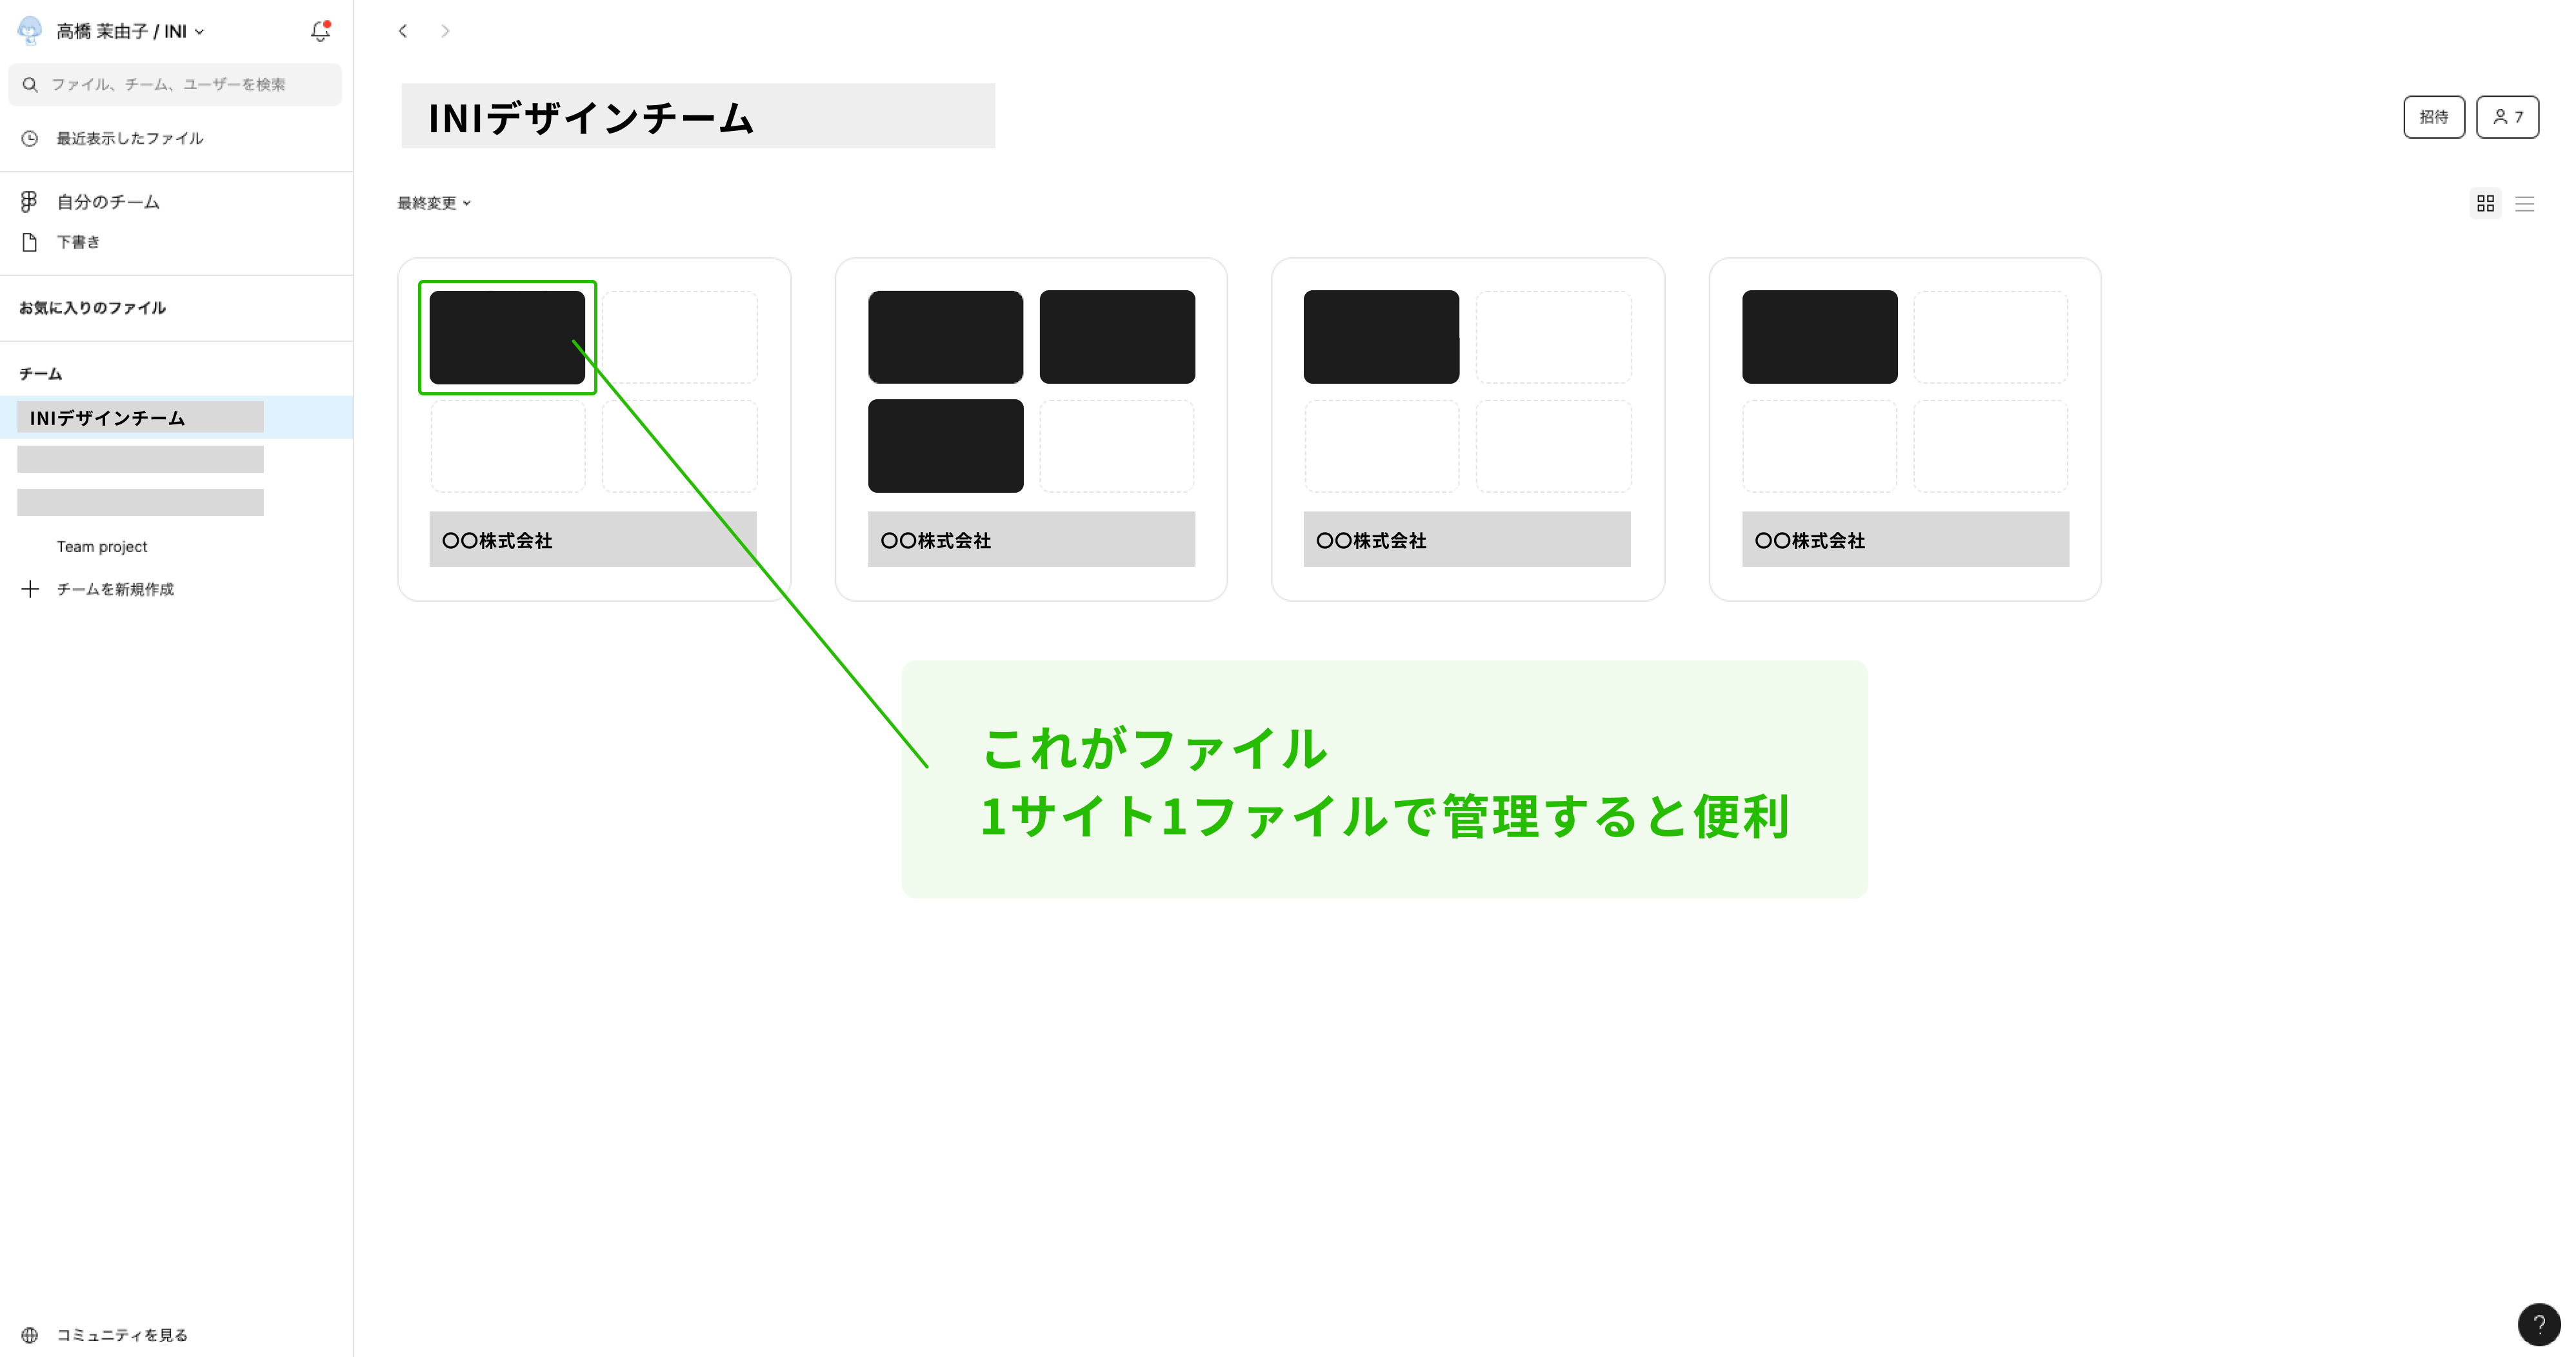 figma-basics-structure-4.png